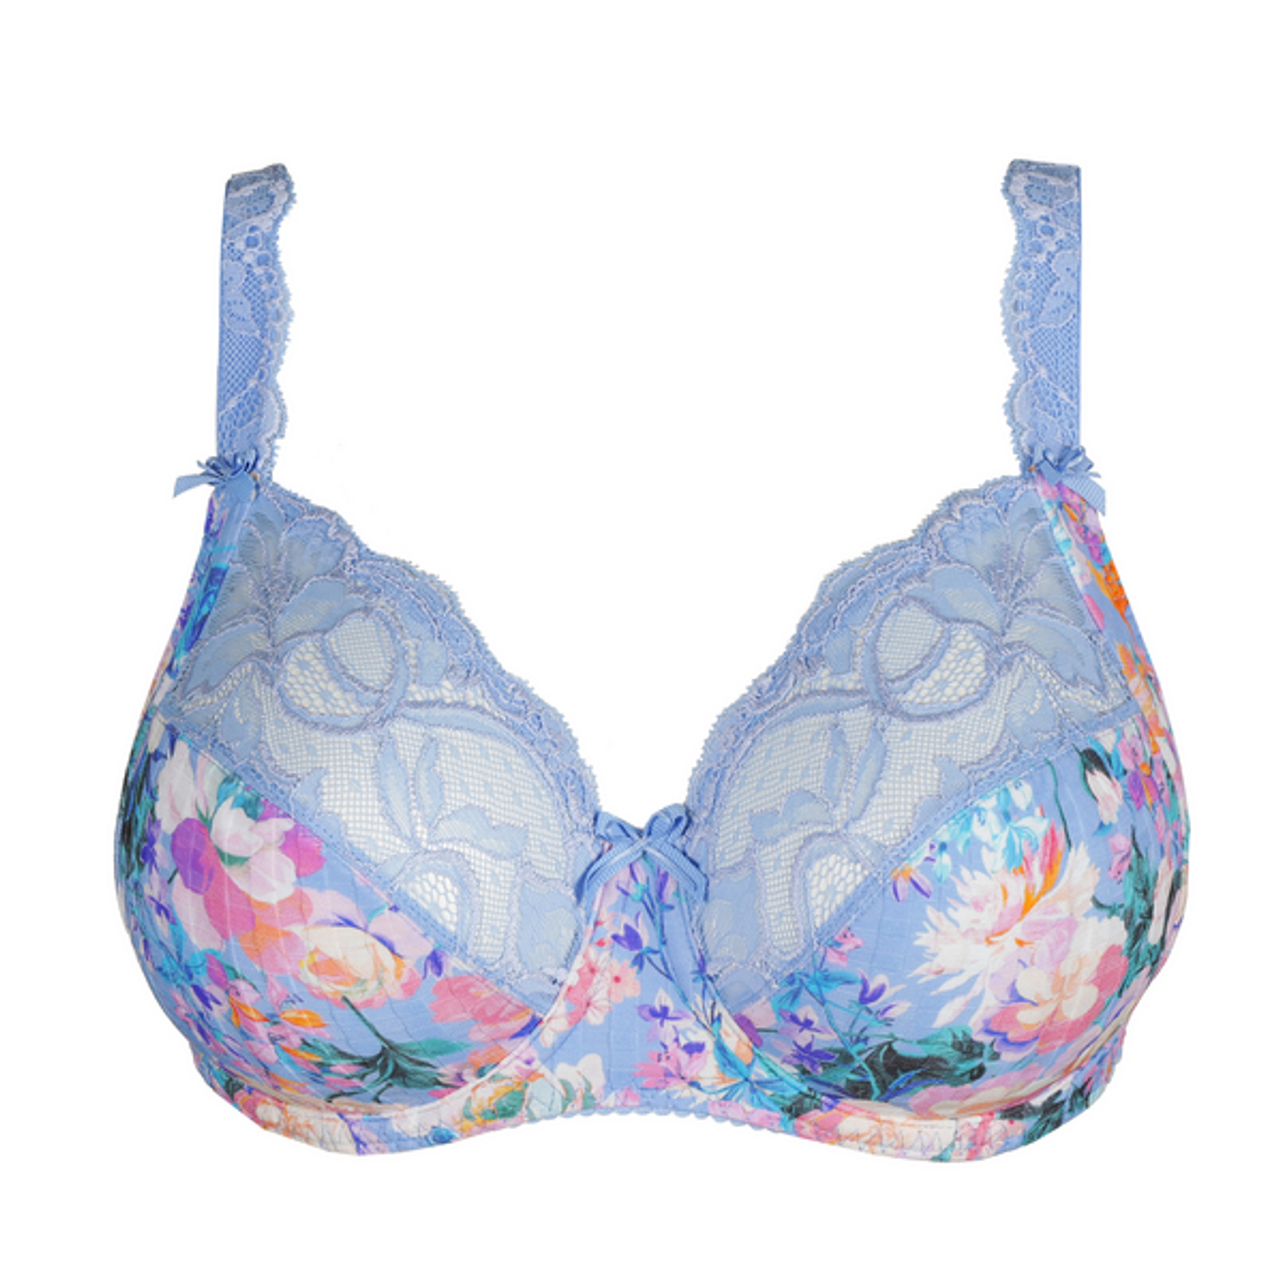 Madison Full Cup - A4 - Bra Necessities